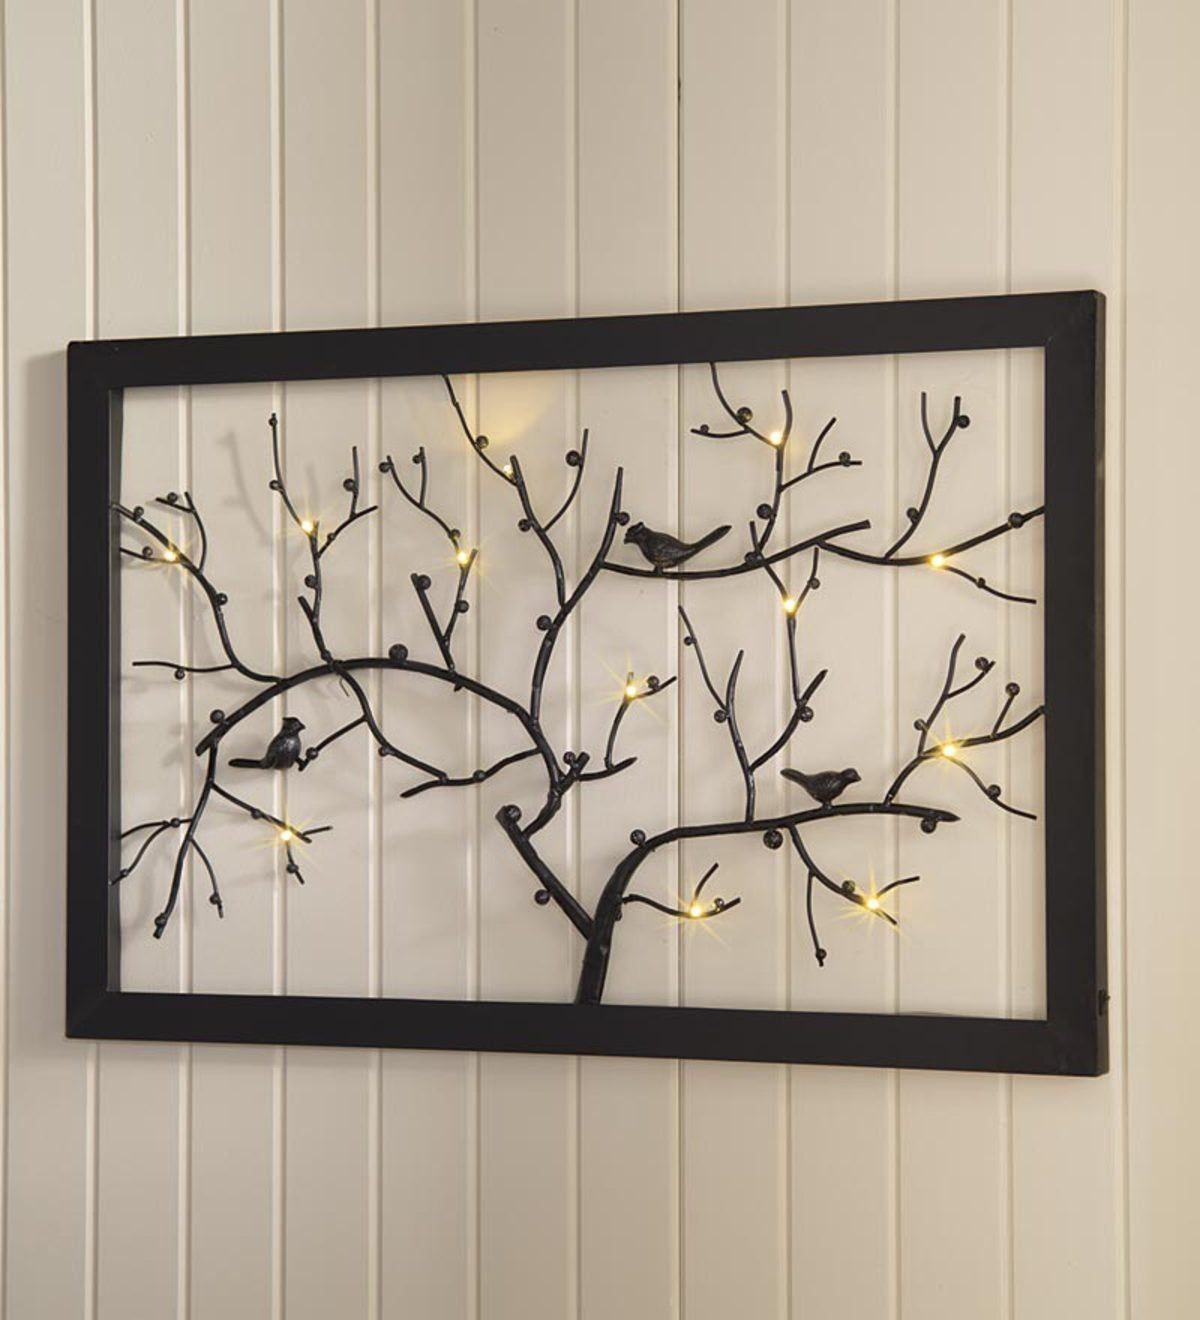 Lighted Bird And Branch Wall Art | Plowhearth For Most Current Bird On Tree Branch Wall Art (View 18 of 20)